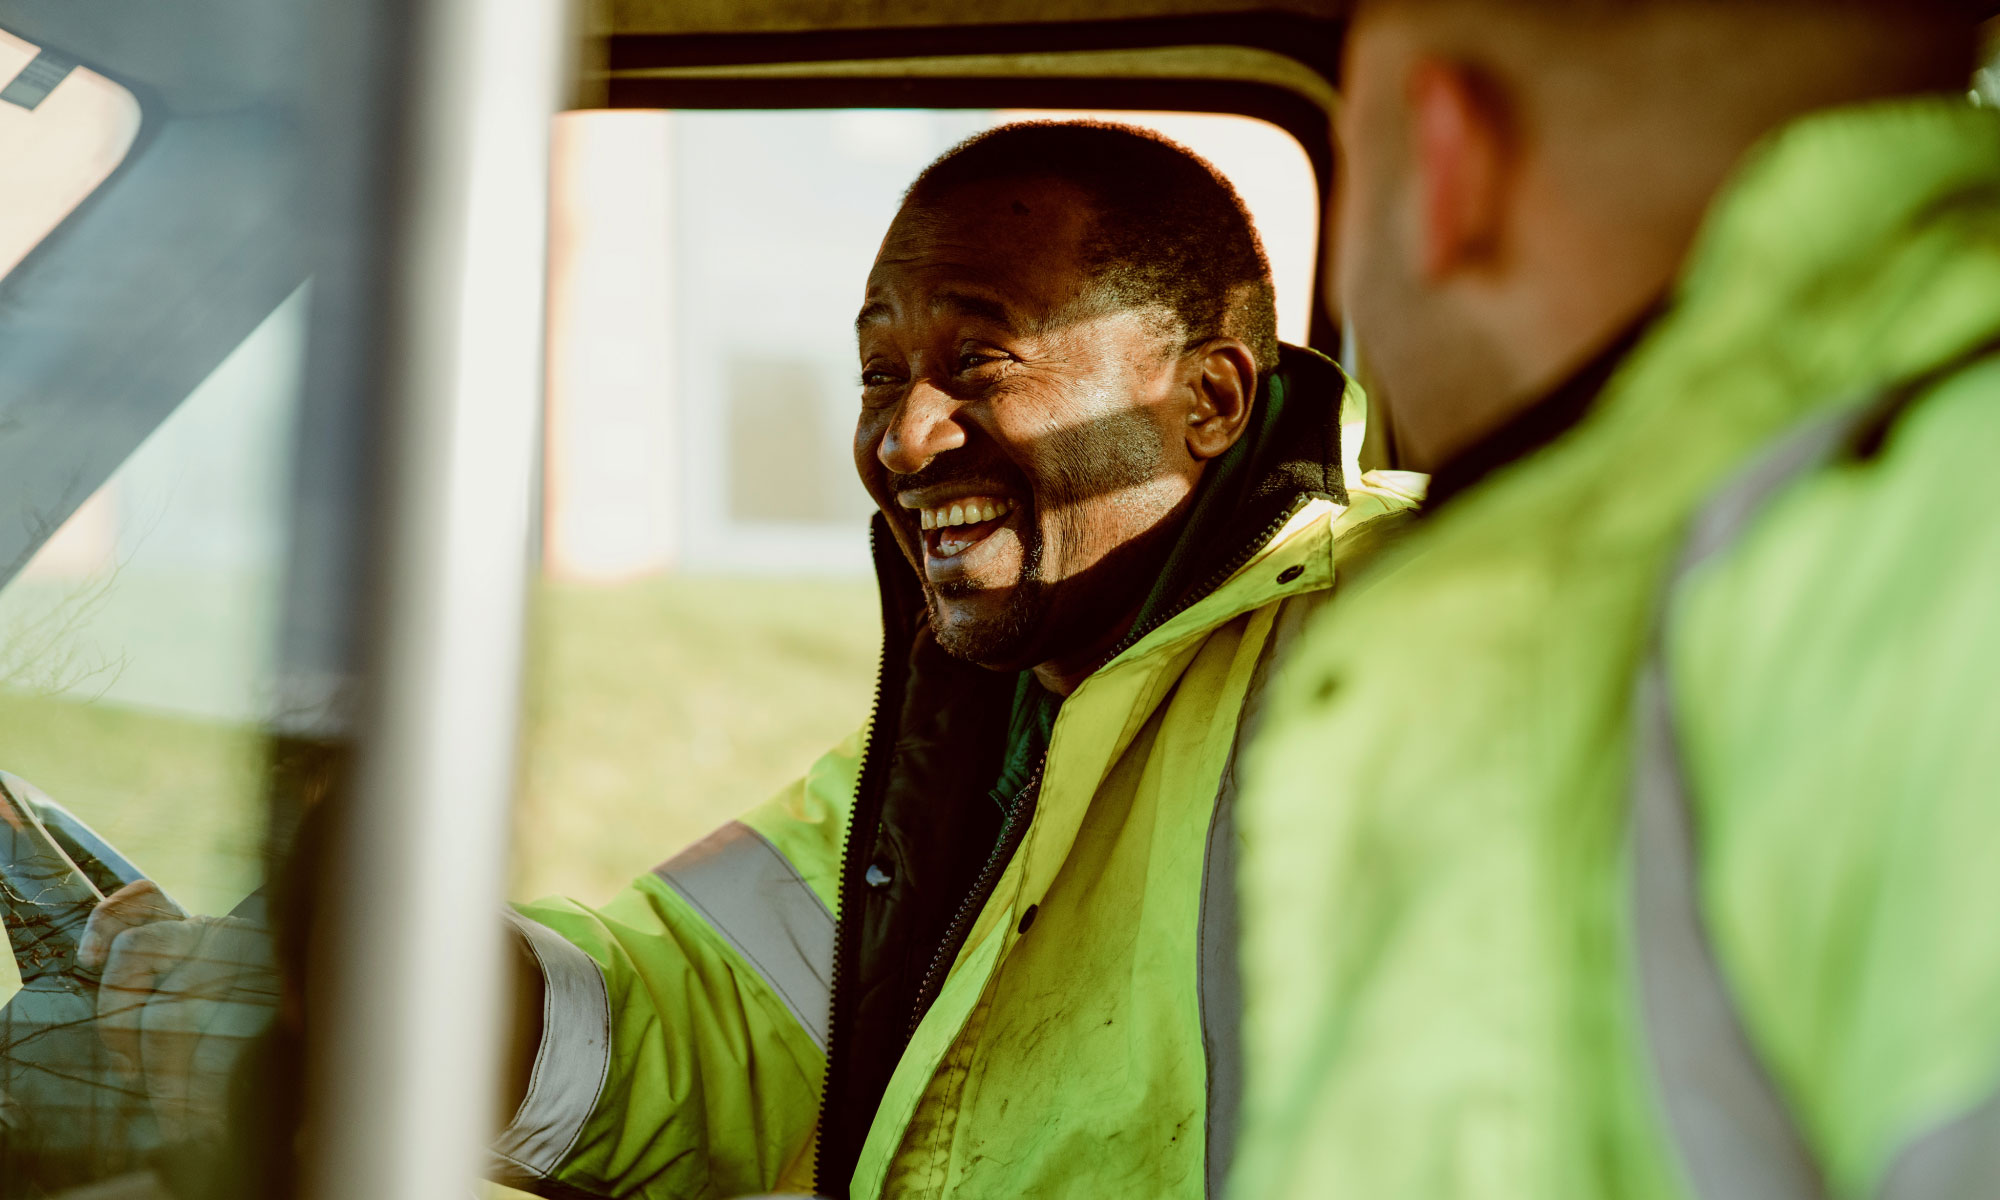 Two van drivers are laughing while wearing high vis vests